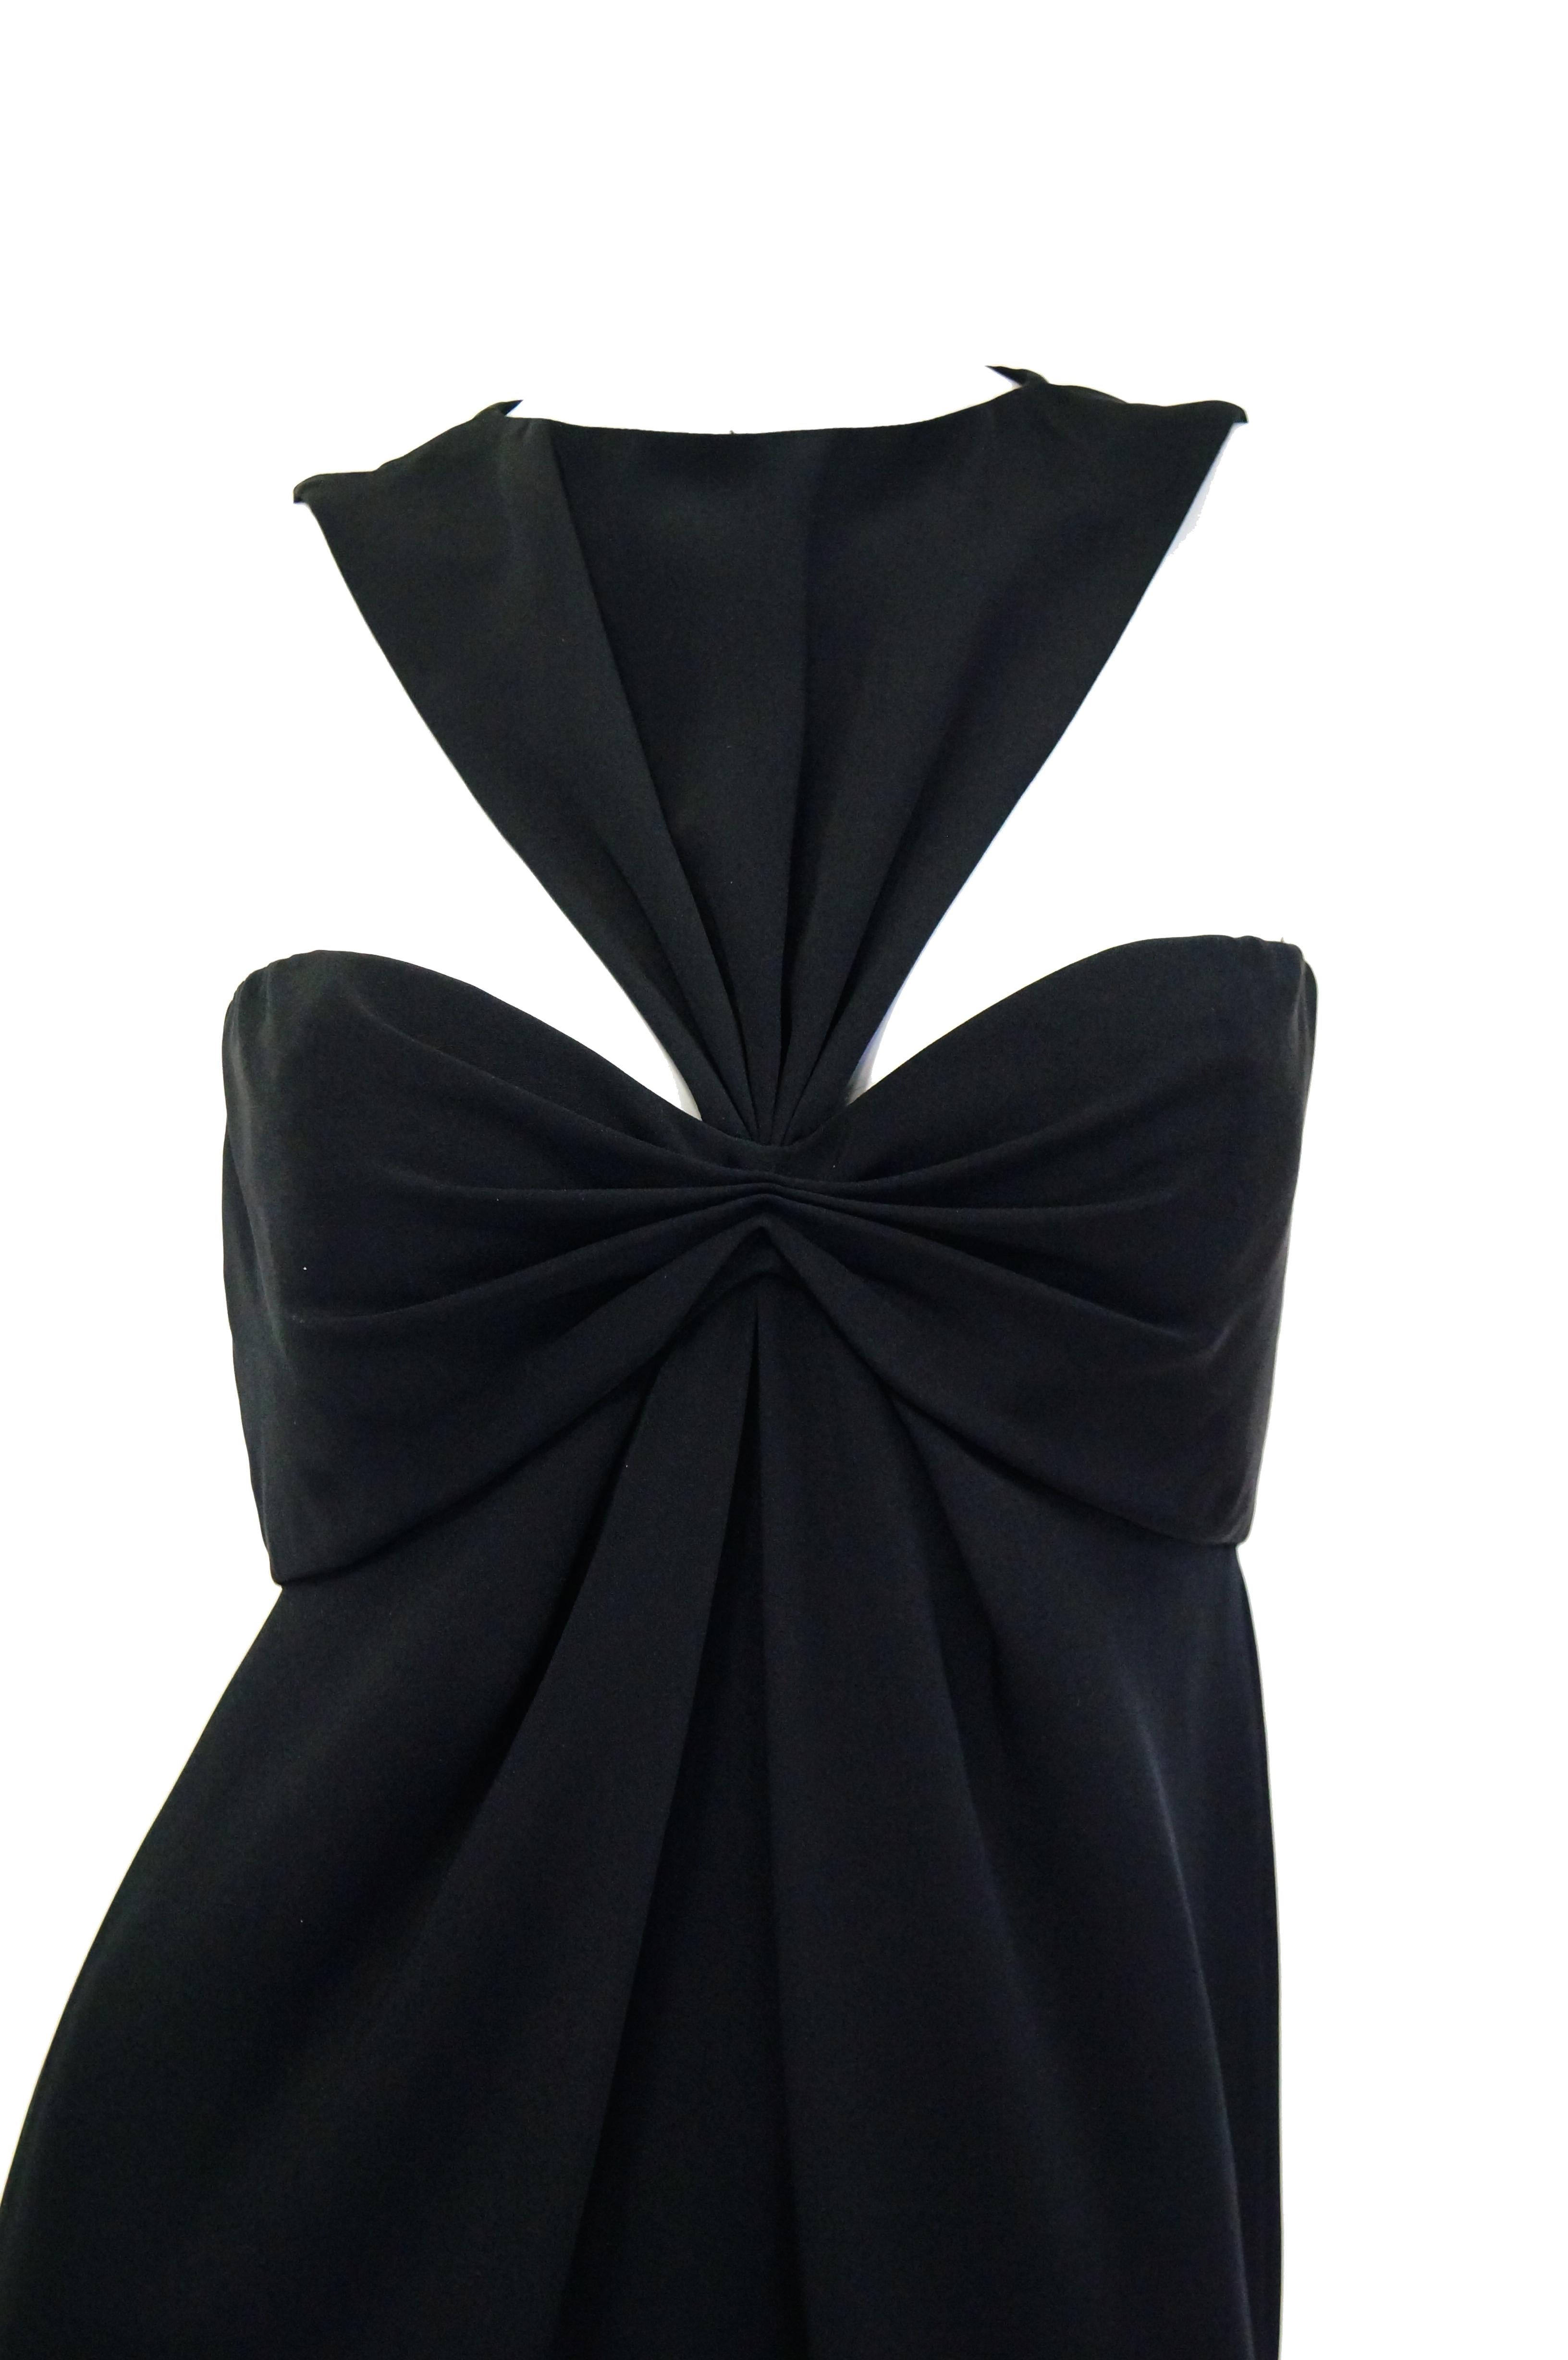 Elegant and unusual cocktail dress by Bill Blass. The dress is knee length, with a fitted silhouette, and sleeveless. The dress has an empire - like shape, with a figure - eight sweetheart bust line that attaches to the remarkable reverse - V -